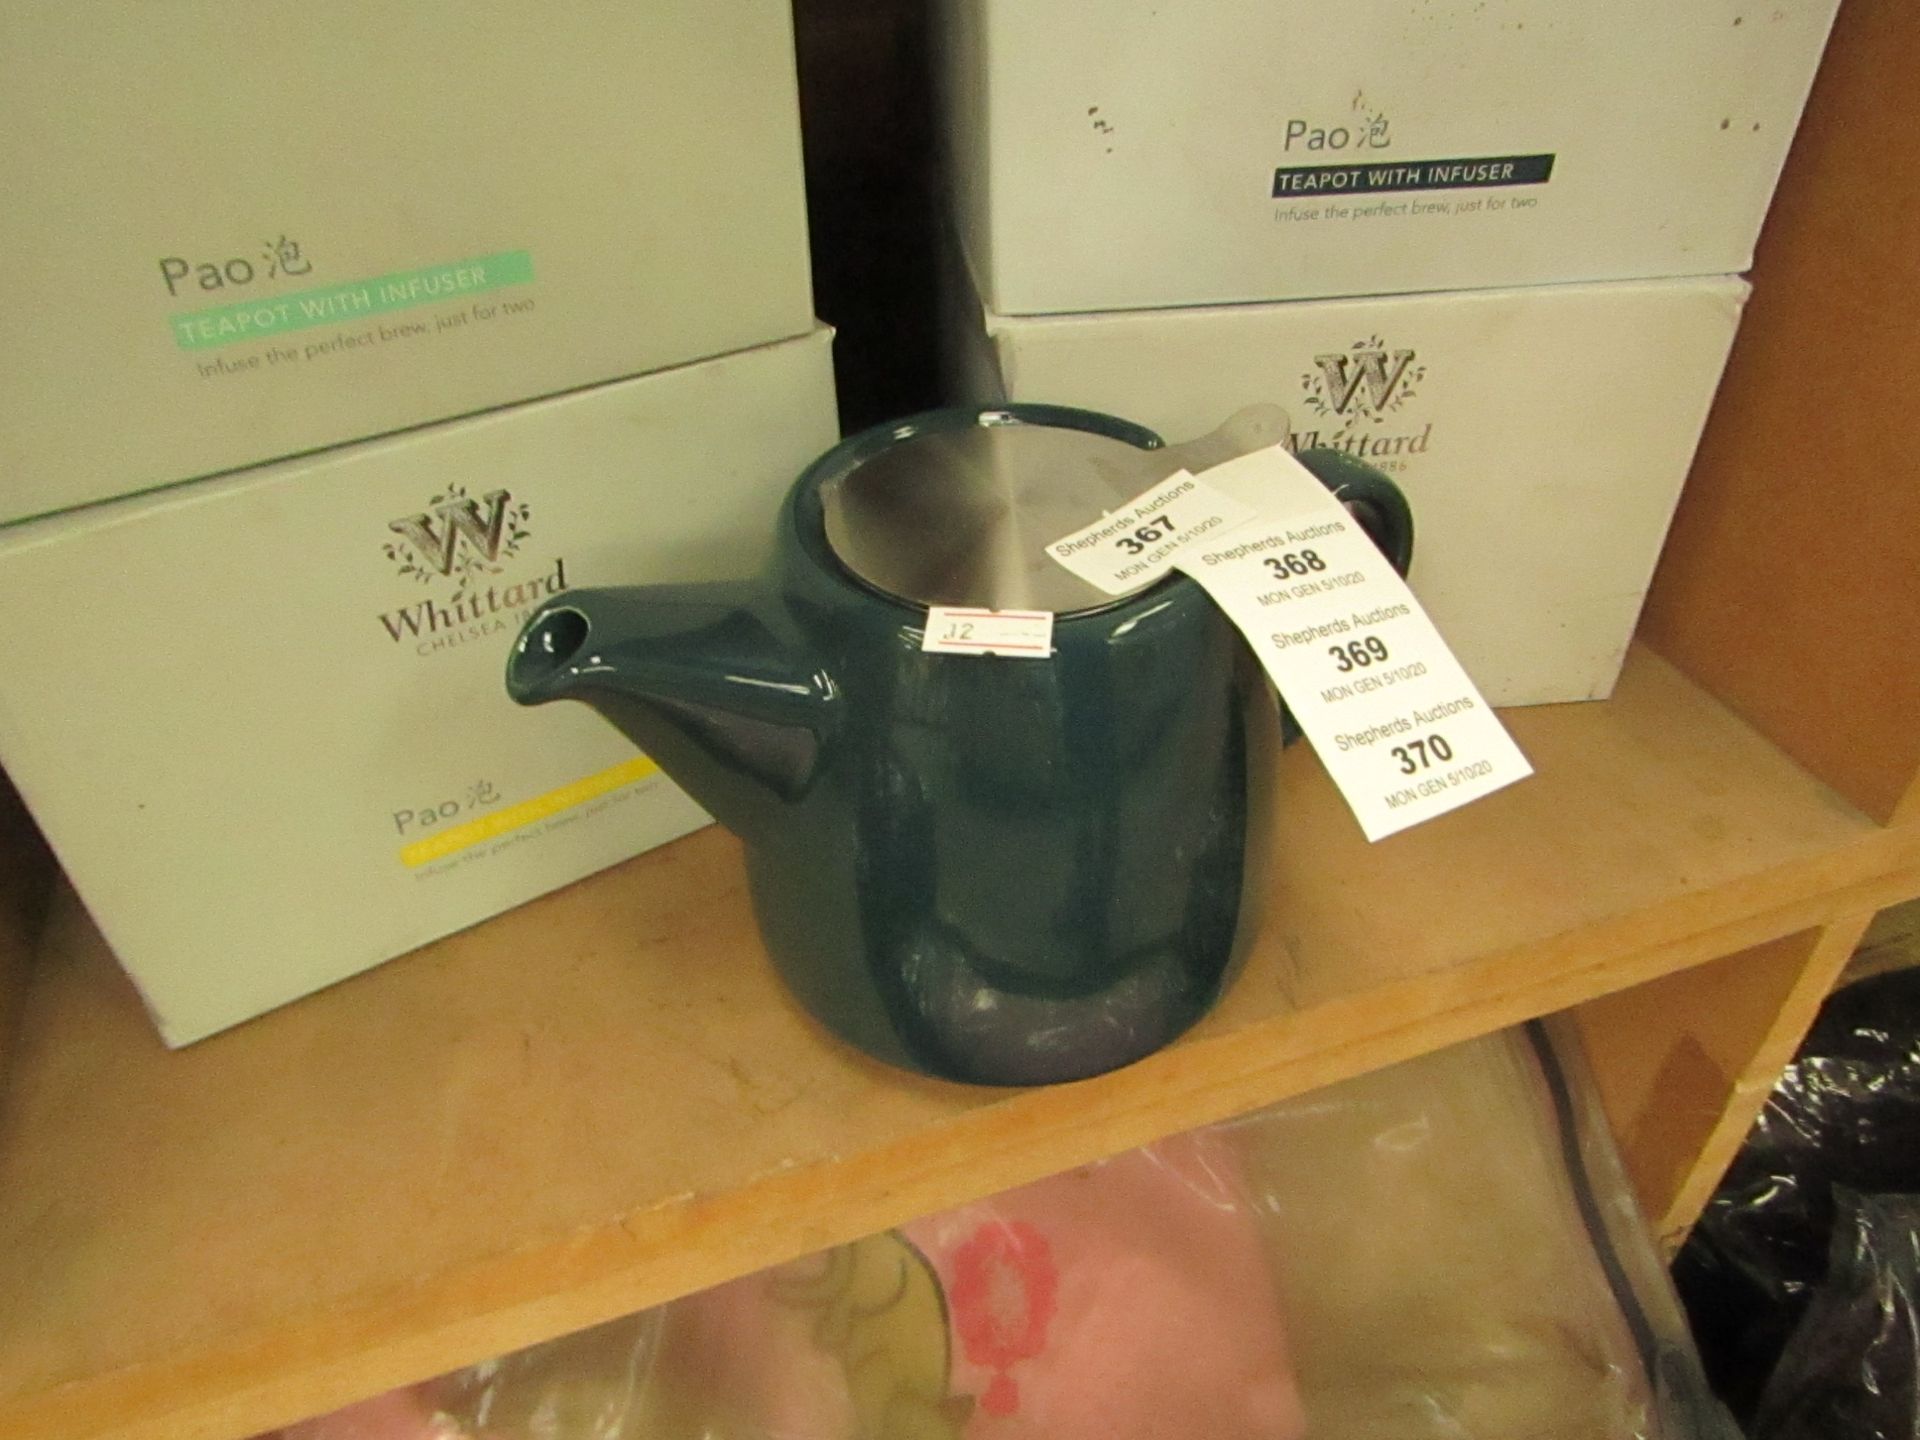 Whittard Chelsea - Teapot With Infuser - All Boxed.